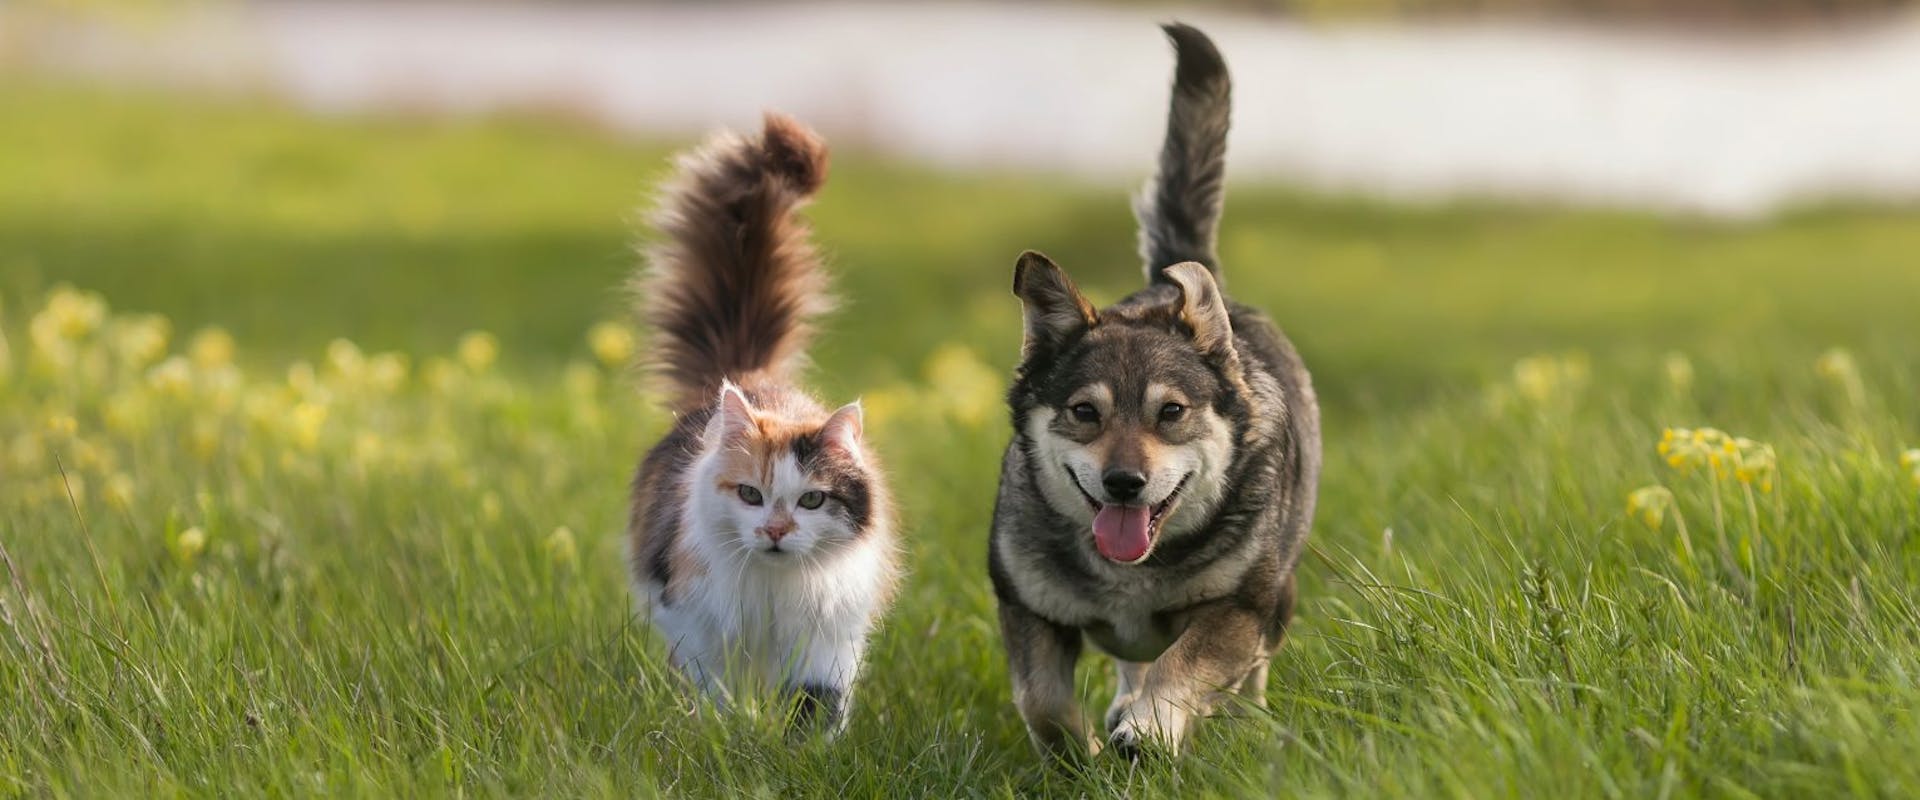 A cat and a dog walking through a meadow.